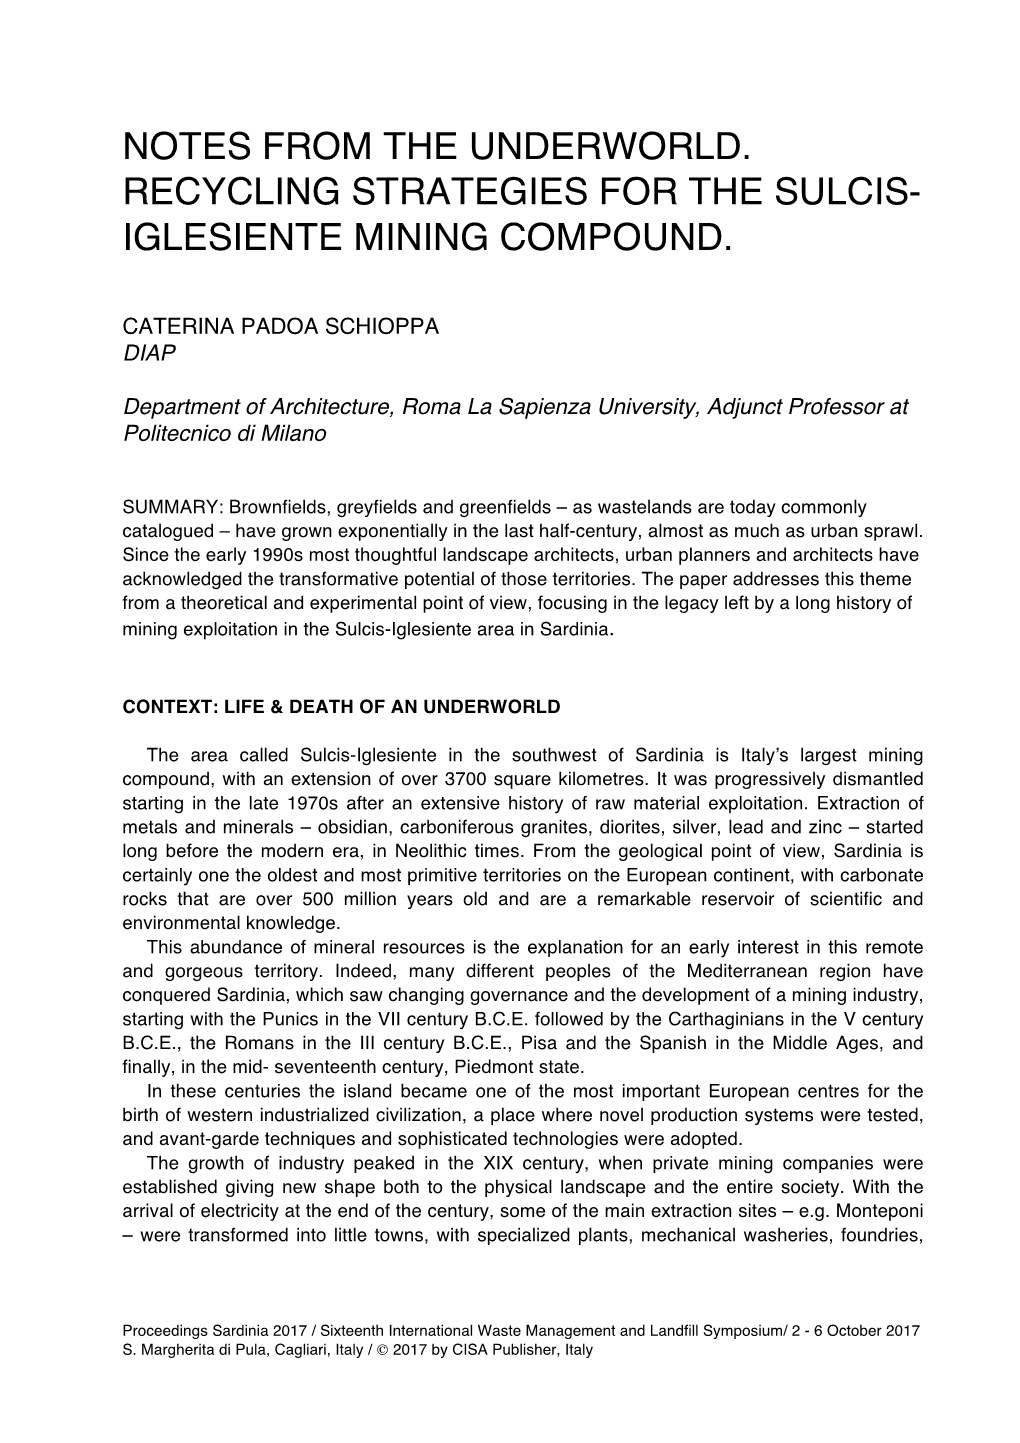 Notes from the Underworld. Recycling Strategies for the Sulcis- Iglesiente Mining Compound